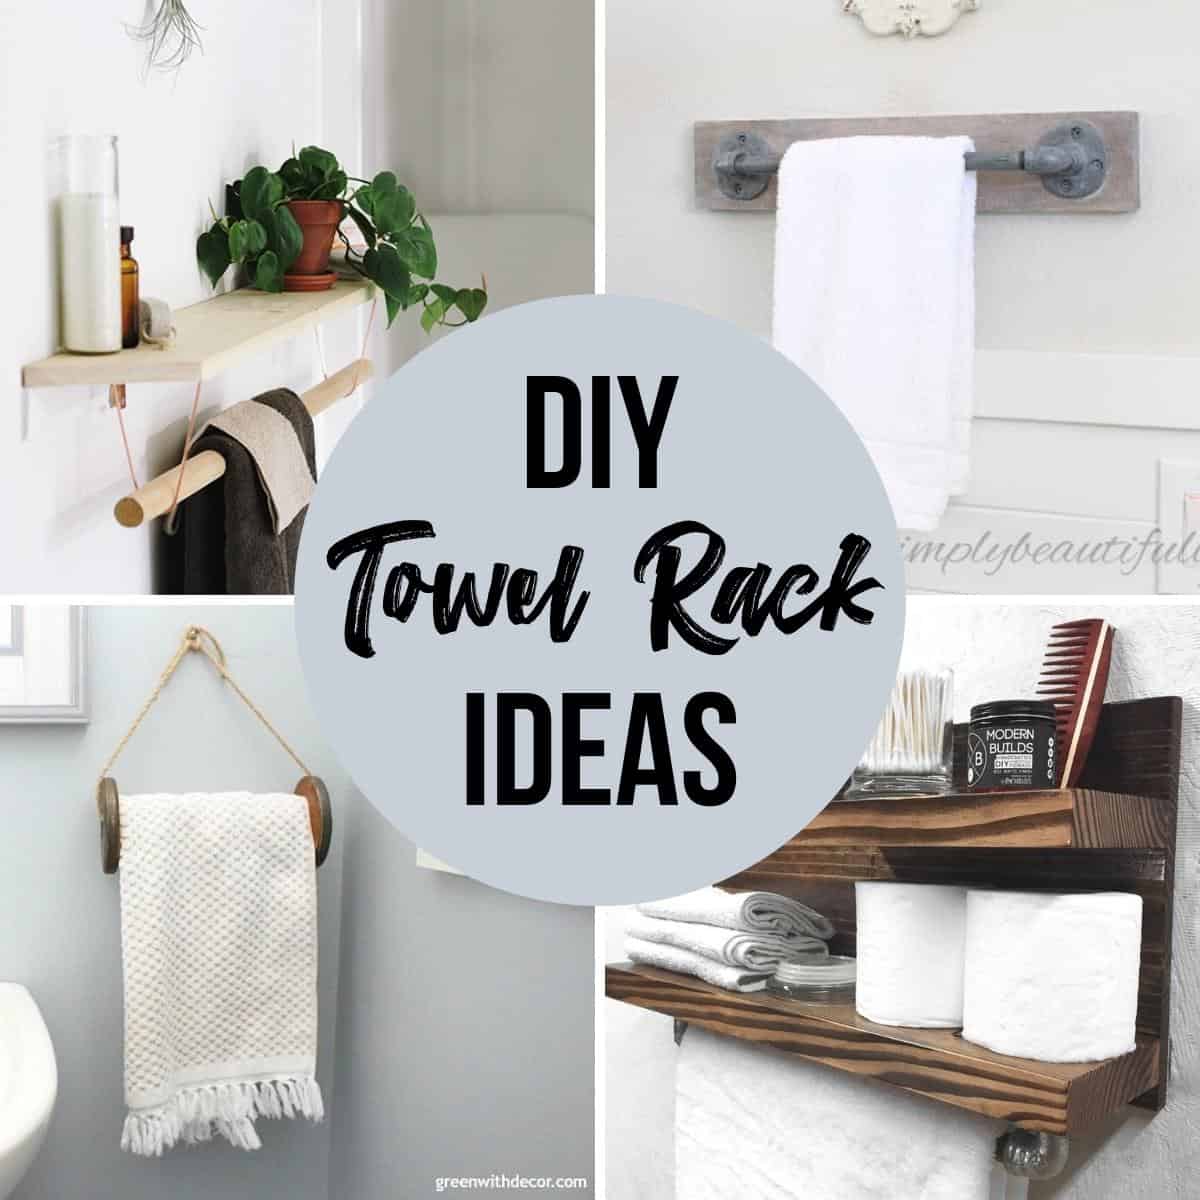 https://www.thehandymansdaughter.com/wp-content/uploads/2020/04/DIY-Towel-Rack-Ideas-featured-image.jpeg